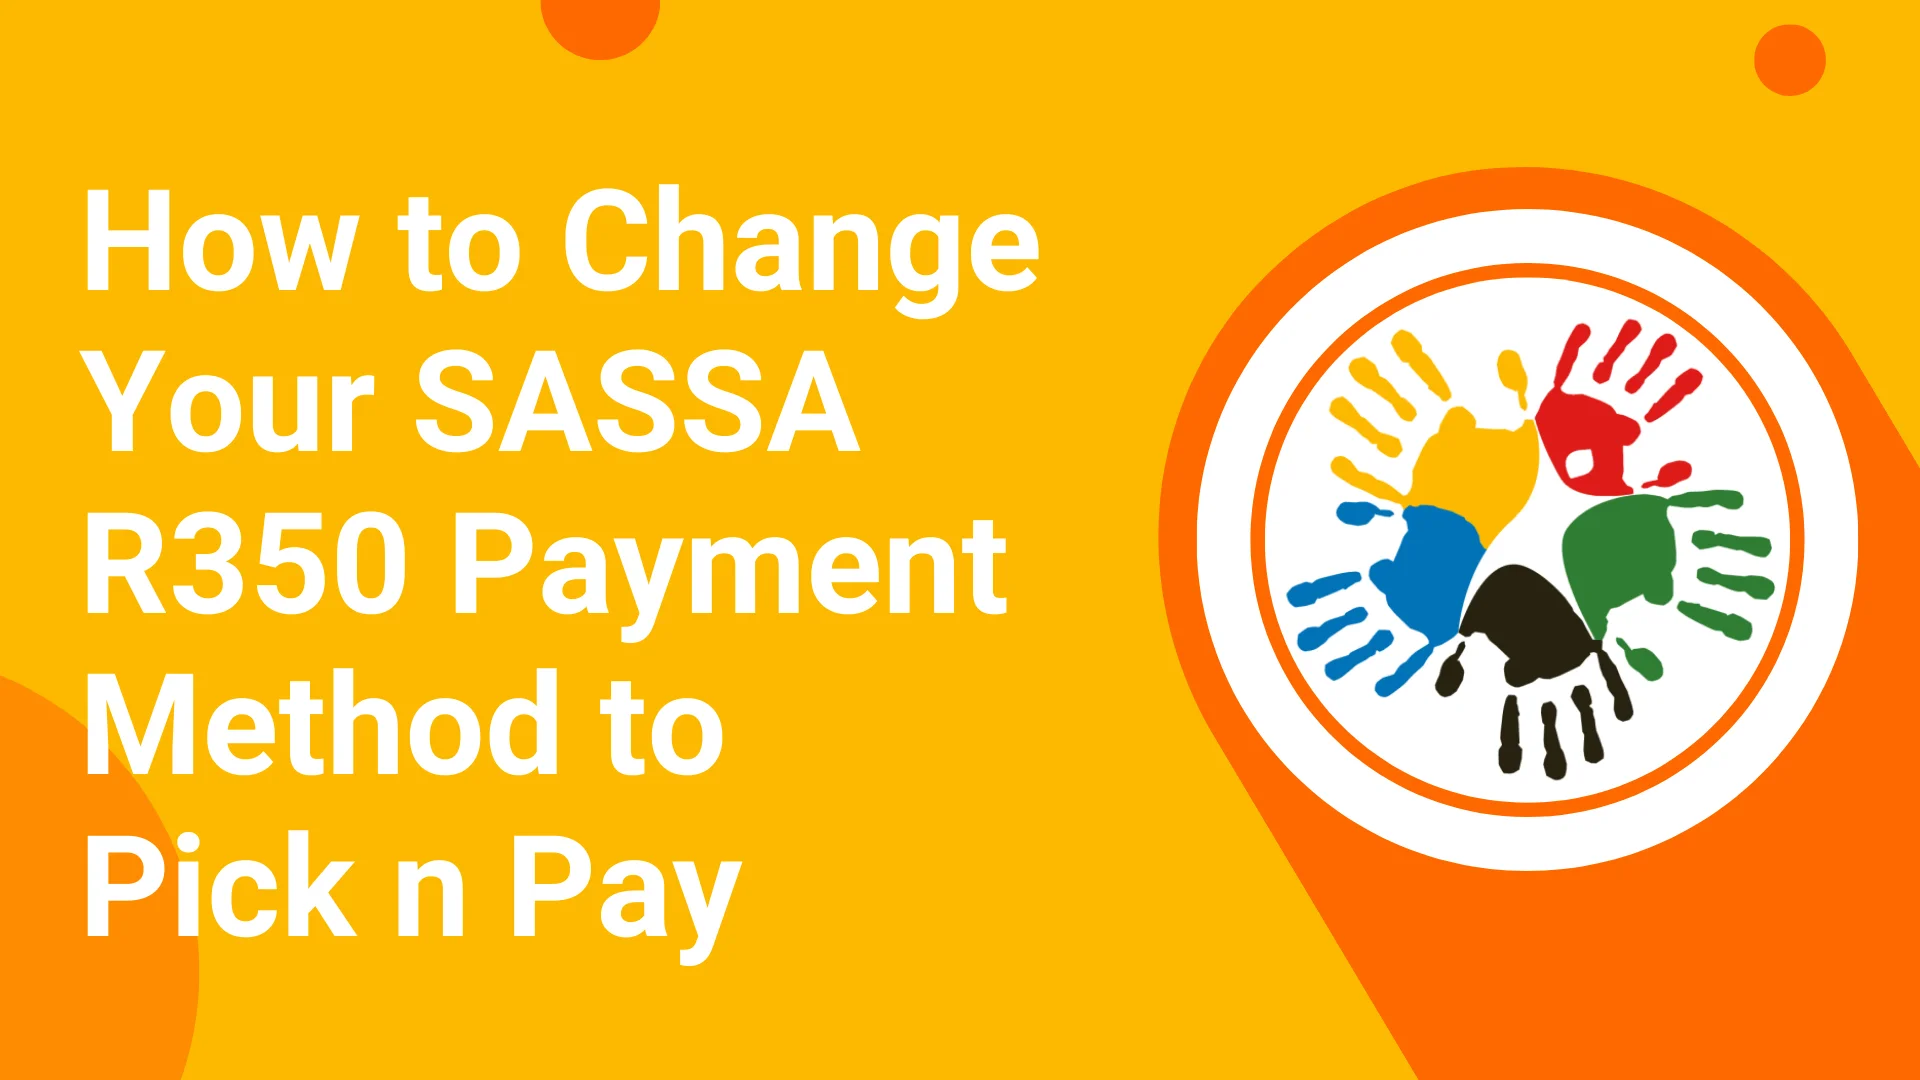 How to Change Your SASSA R350 Payment Method to Pick n Pay